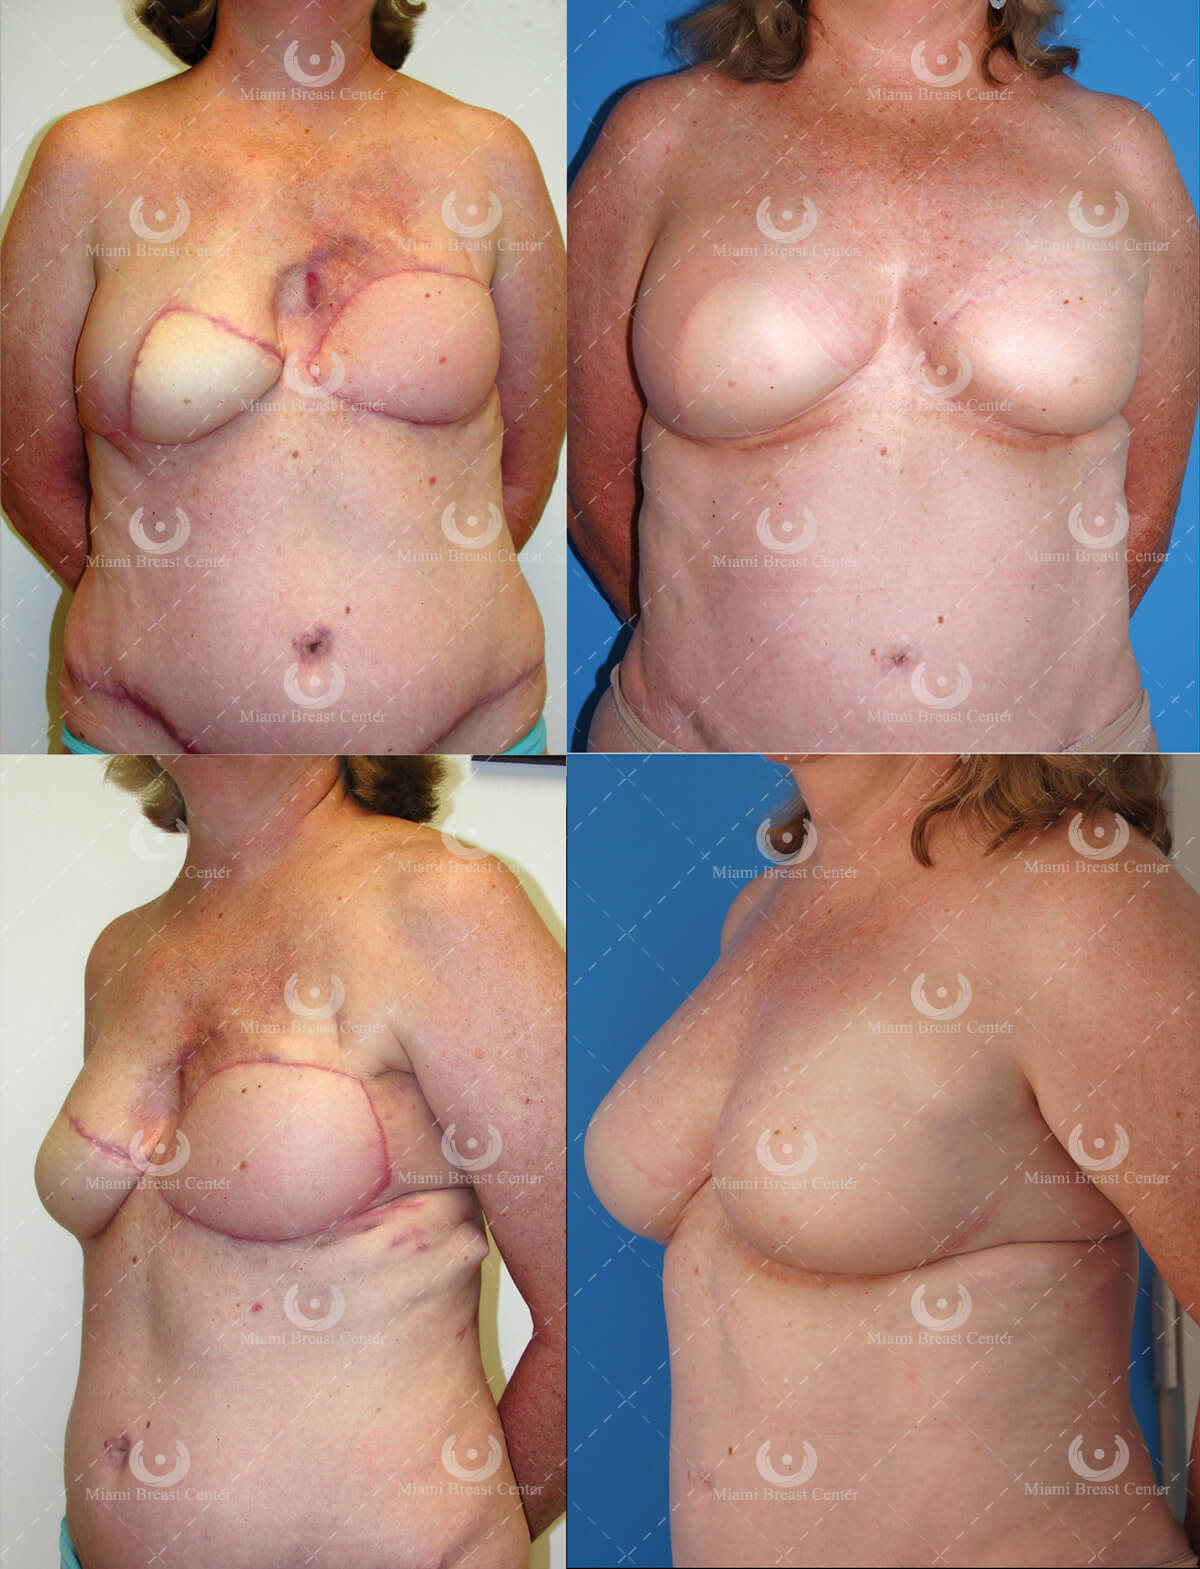 failed flap reconstruction with fat transfer